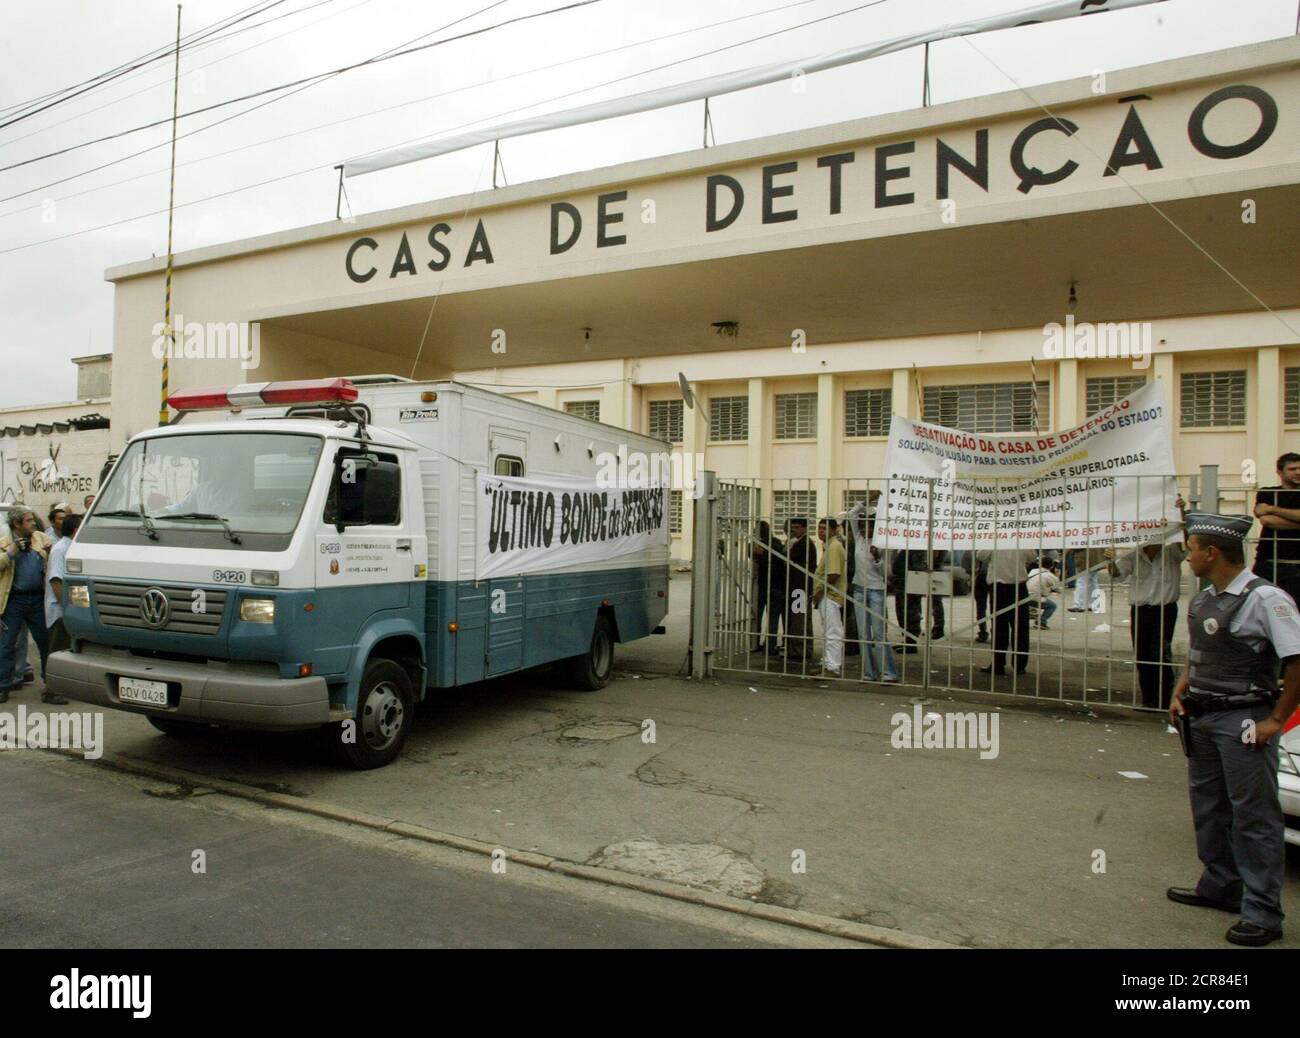 A paddy wagon bearing a banner that reads, 'The last train from Detencao,' transports inmates from the Casa de Detencao prison at the Carandiru prison complex in Sao Paulo, September 15, 2002. The last 76 of nearly 8,000 inmates left the prison protected by riot police, during a ceremony that shut down Latin's America largest prison, site of a 1992 massacre that left 111 dead. REUTERS/Paulo Whitaker  PW/HB Stock Photo